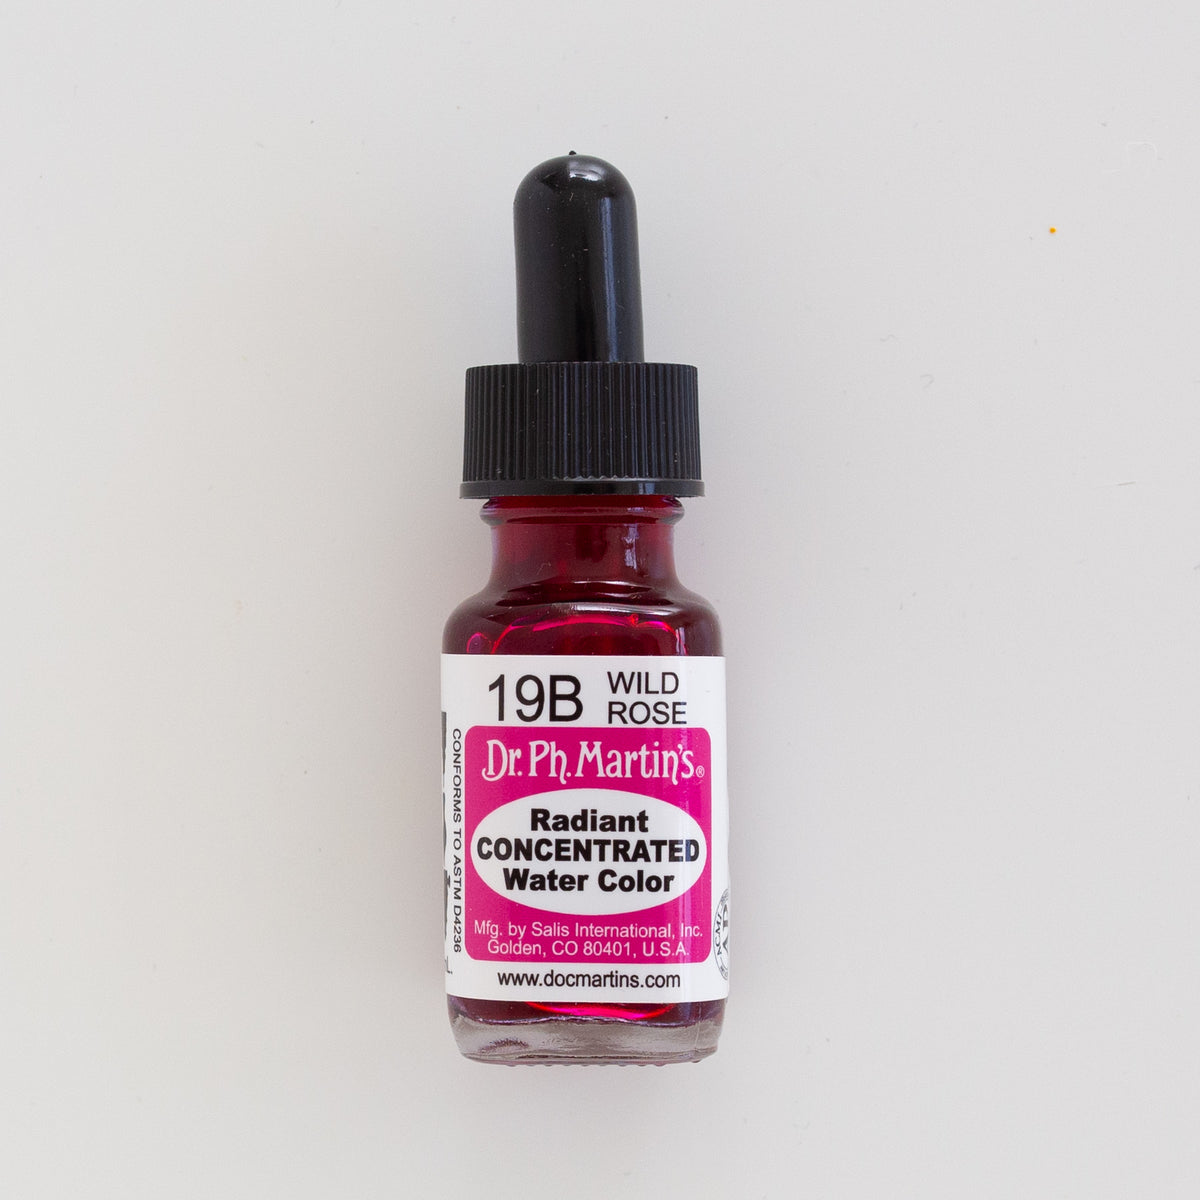 DR. Ph. Martin's Radiant Concentrated 19B Wild Rose